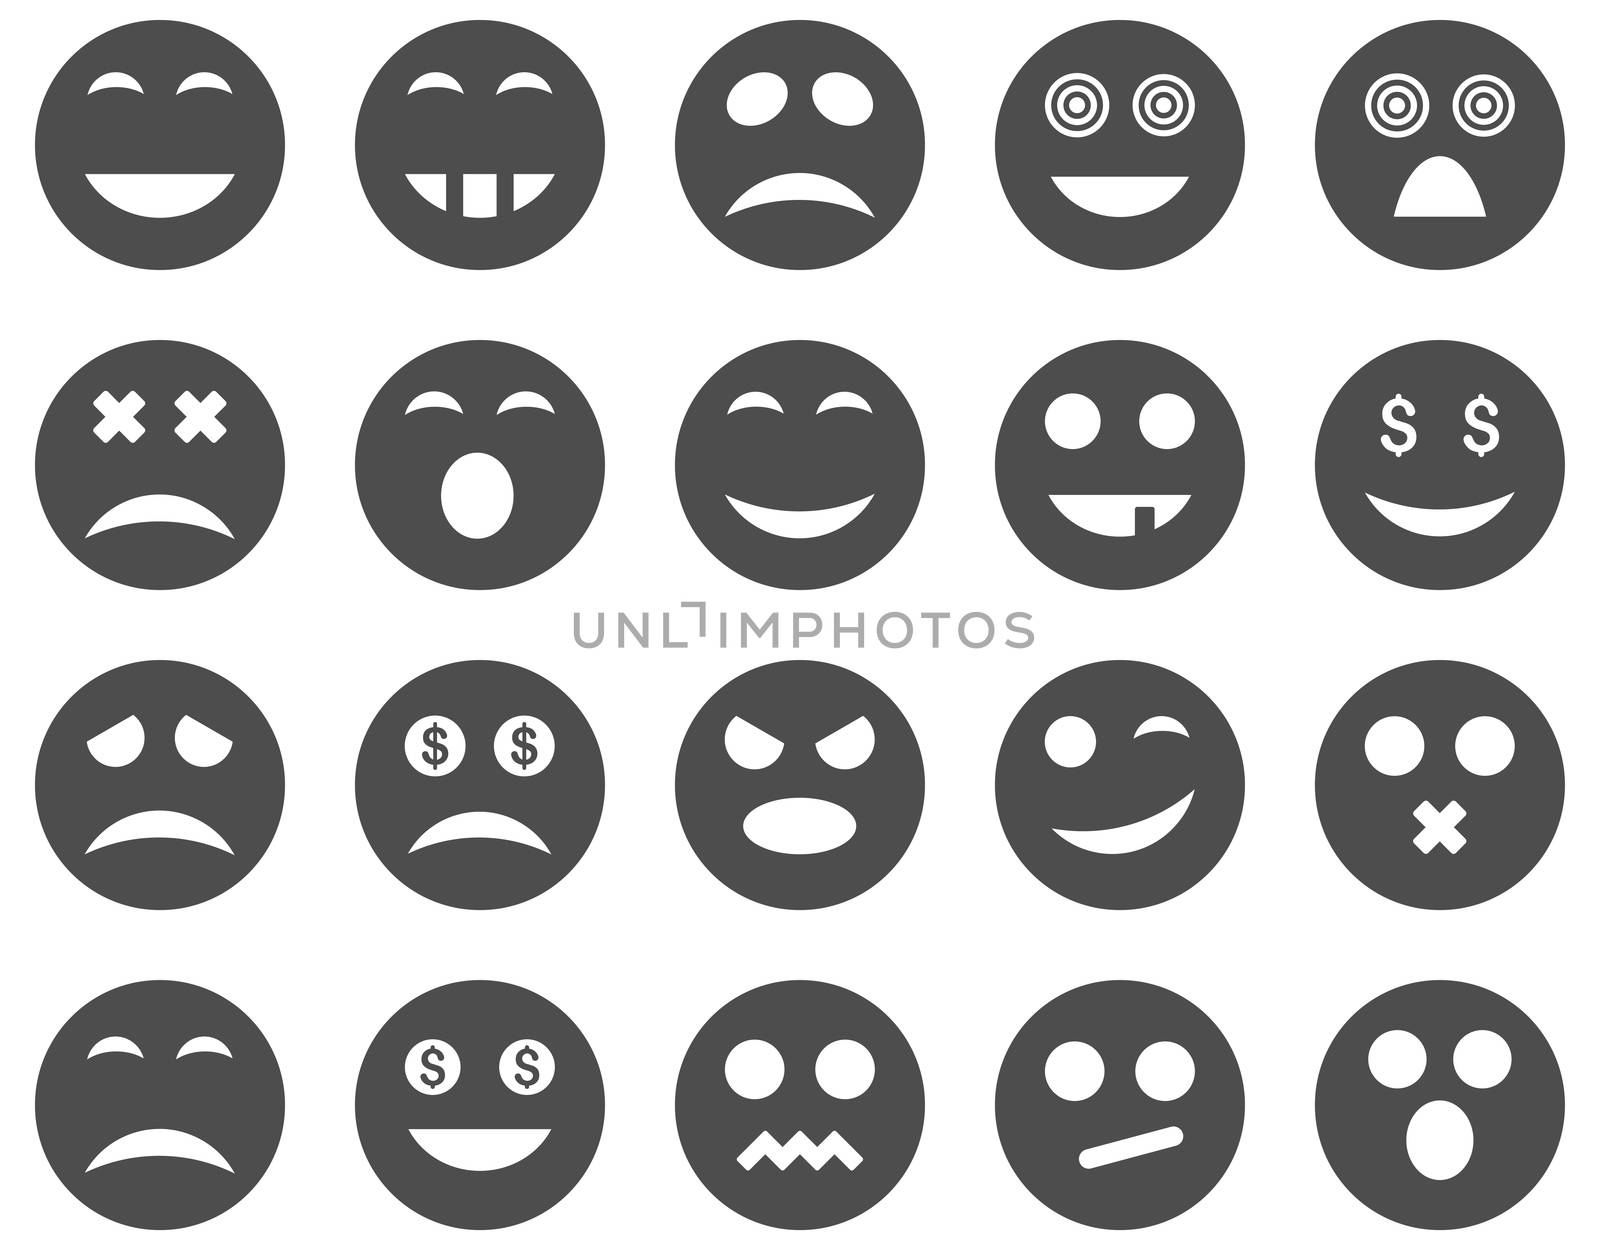 Smile and emotion icons. Glyph set style is flat images, gray symbols, isolated on a white background.